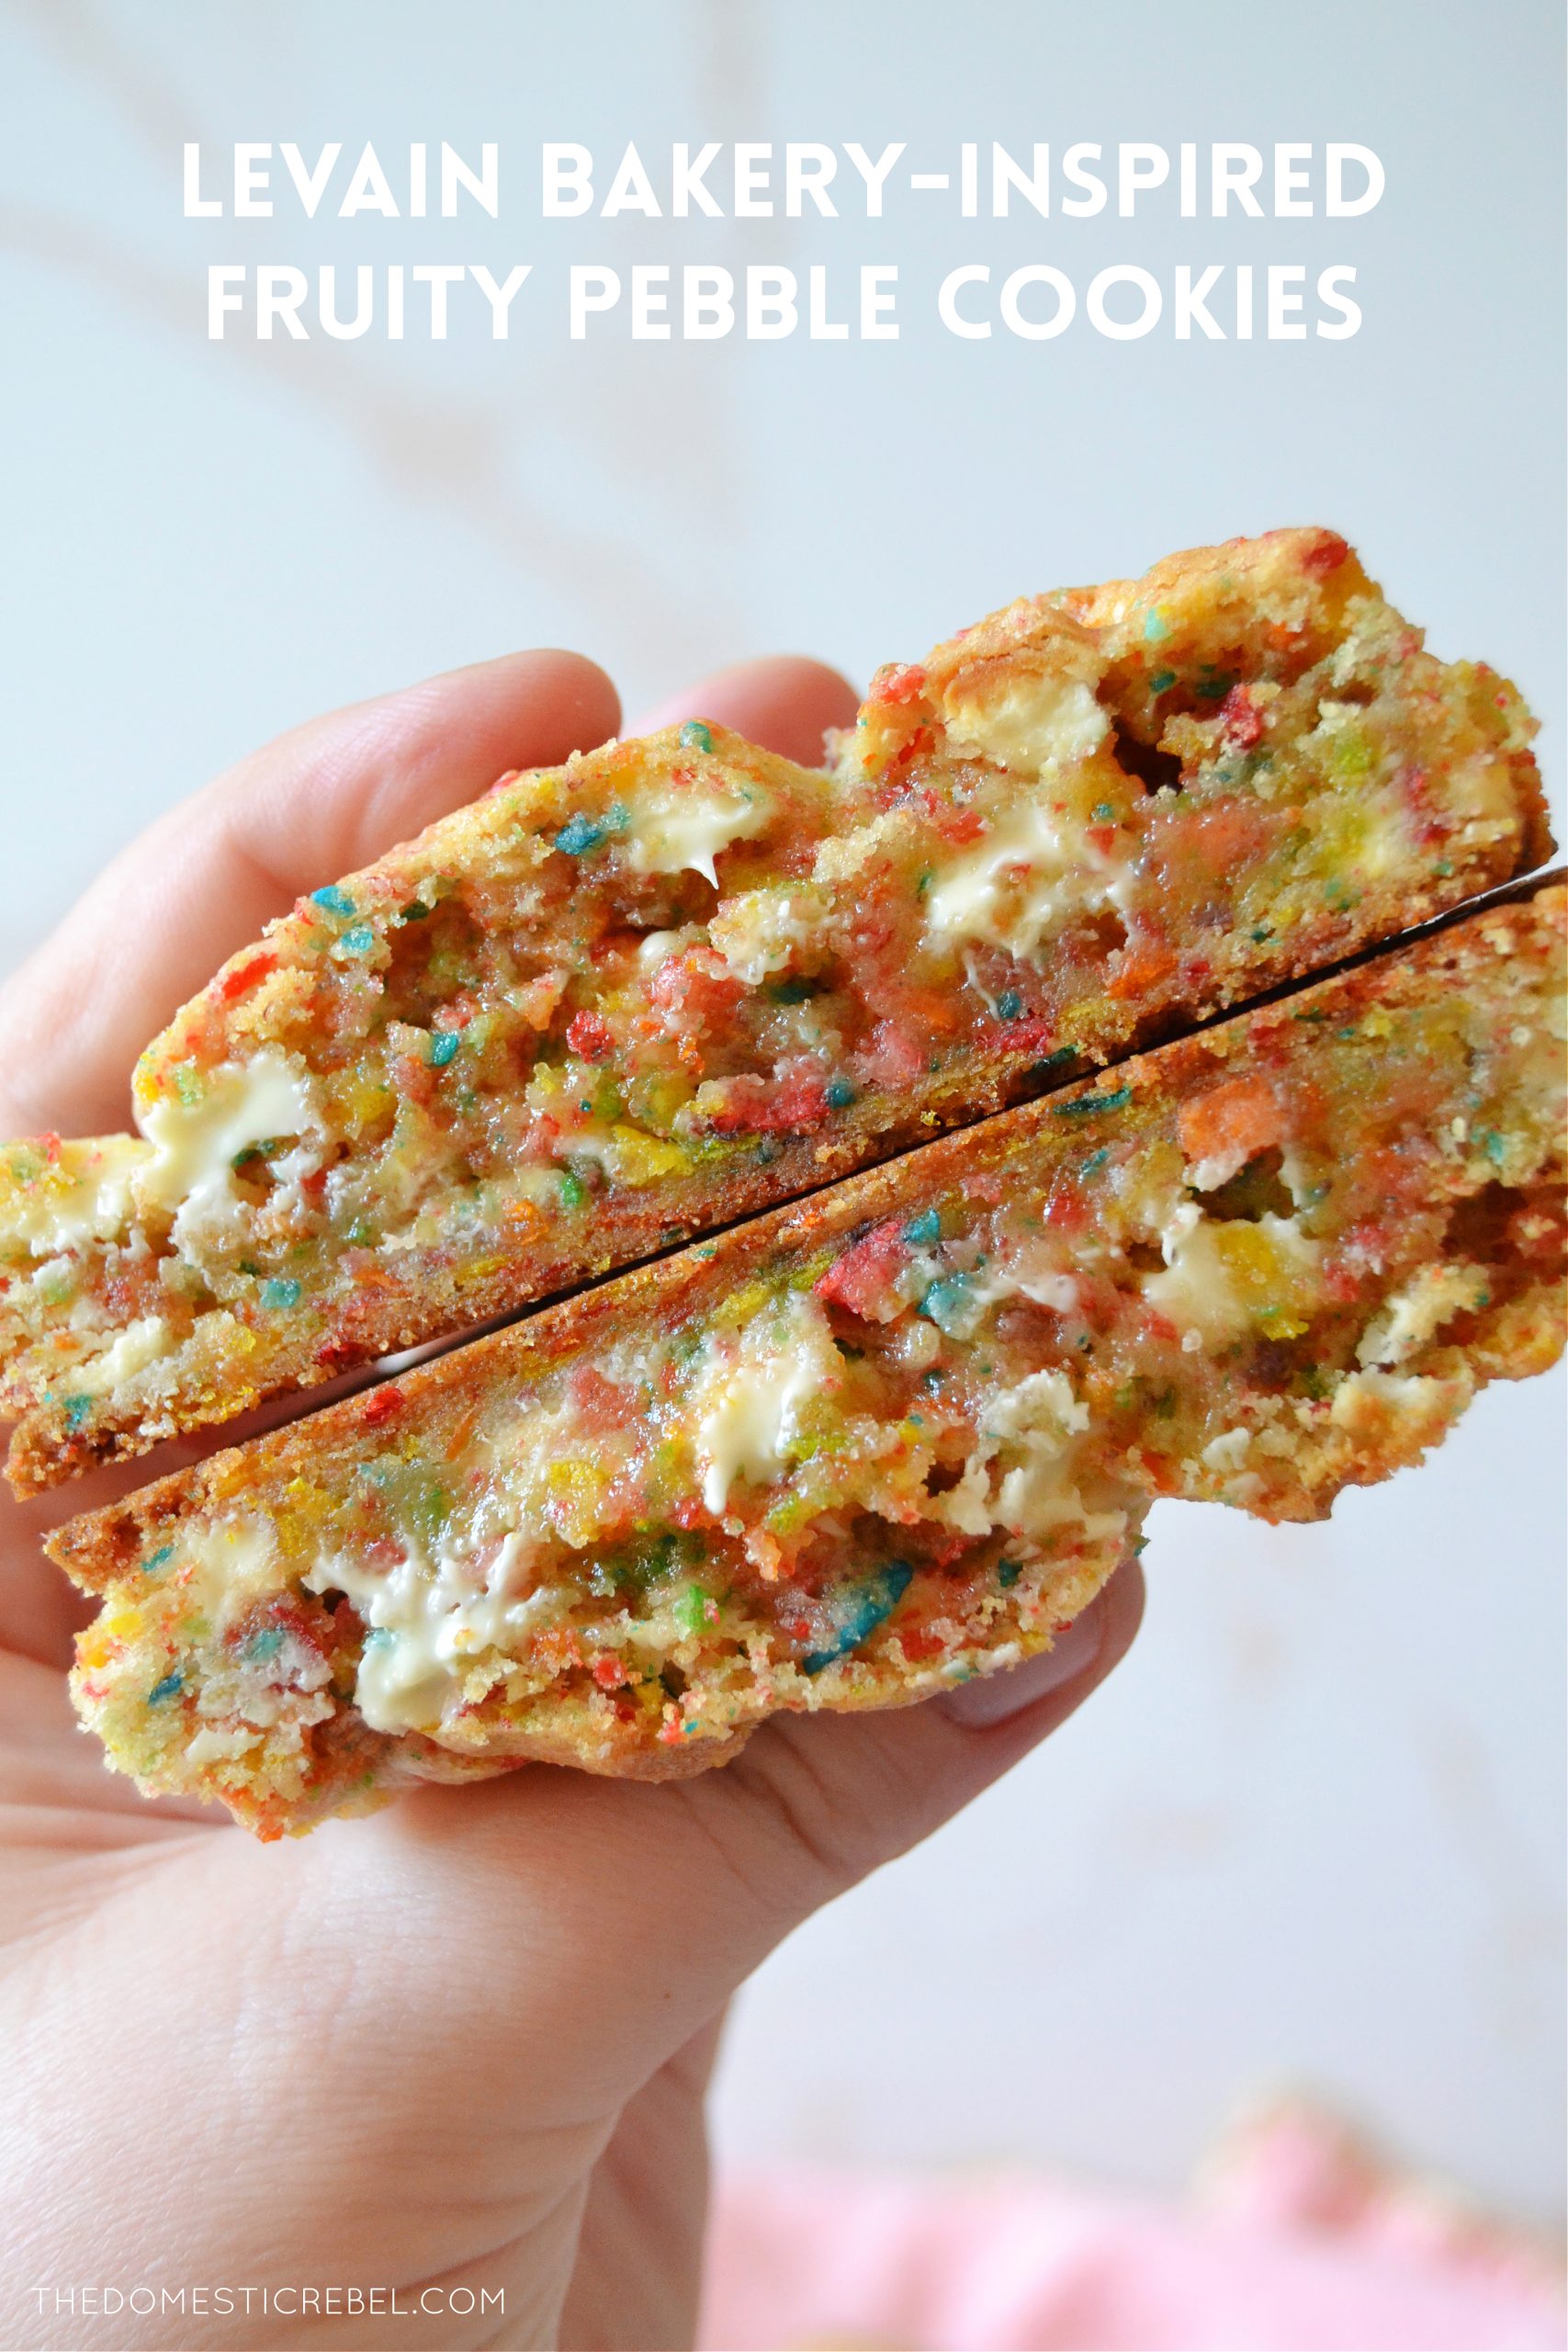 https://thedomesticrebel.com/wp-content/uploads/2022/03/LEVAIN-BAKERY-INSPIRED-FRUITY-PEBBLE-COOKIES-scaled.jpg